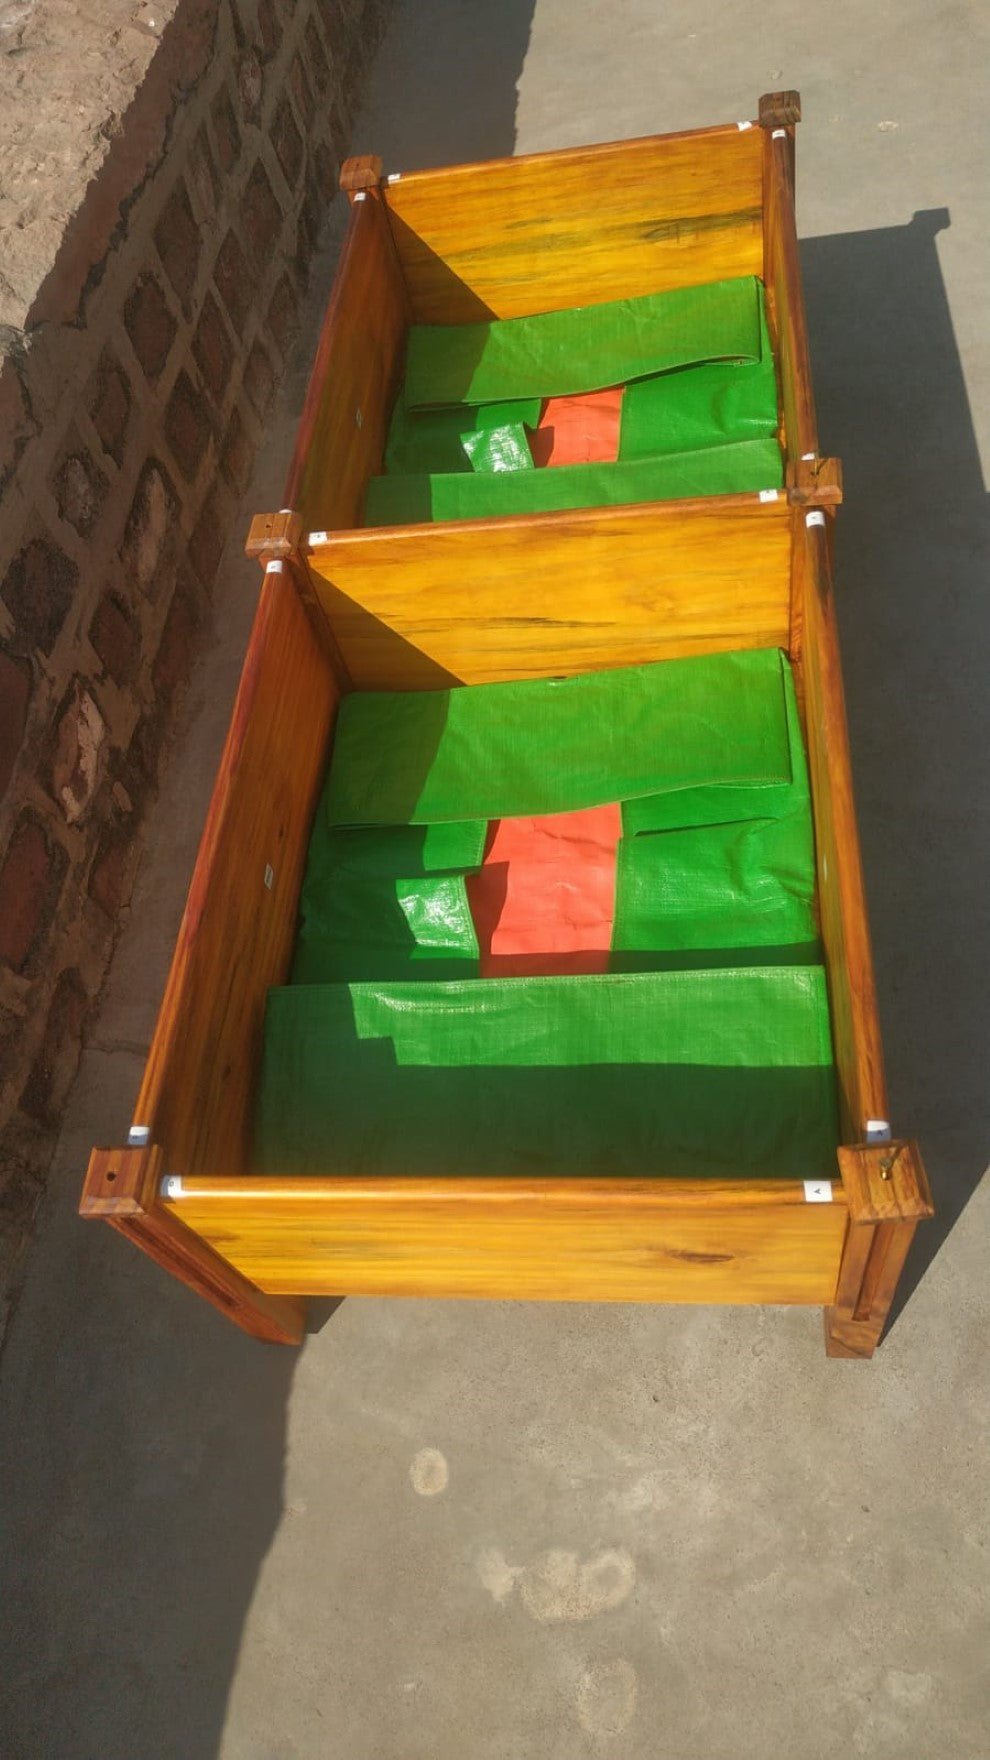 Elevated Garden Beds - Extra Large - Type 2 (18” wide)